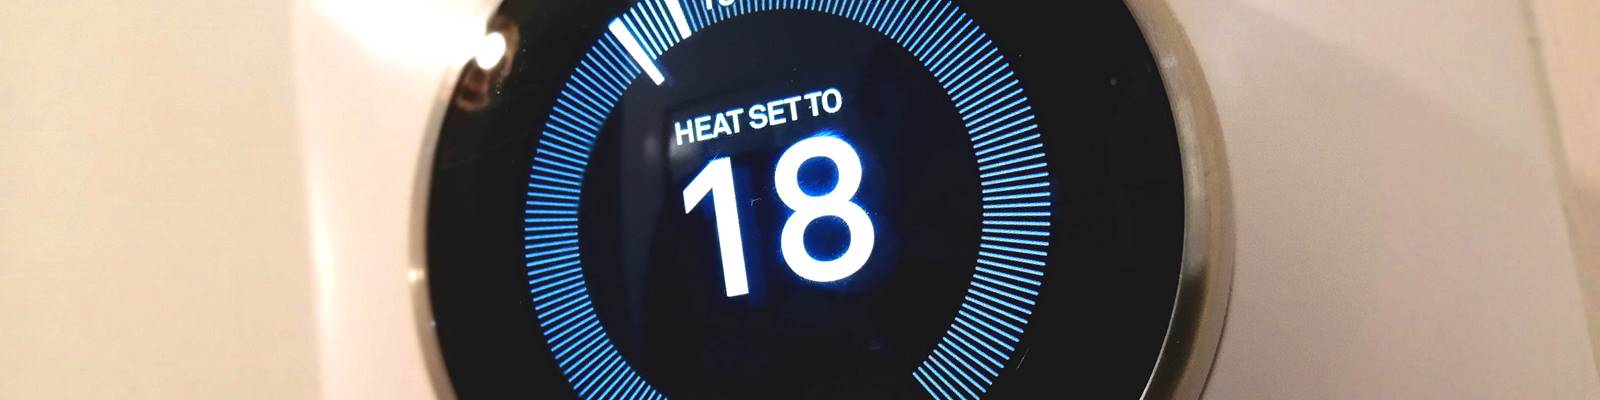 Smart Thermostat set to 18 degrees